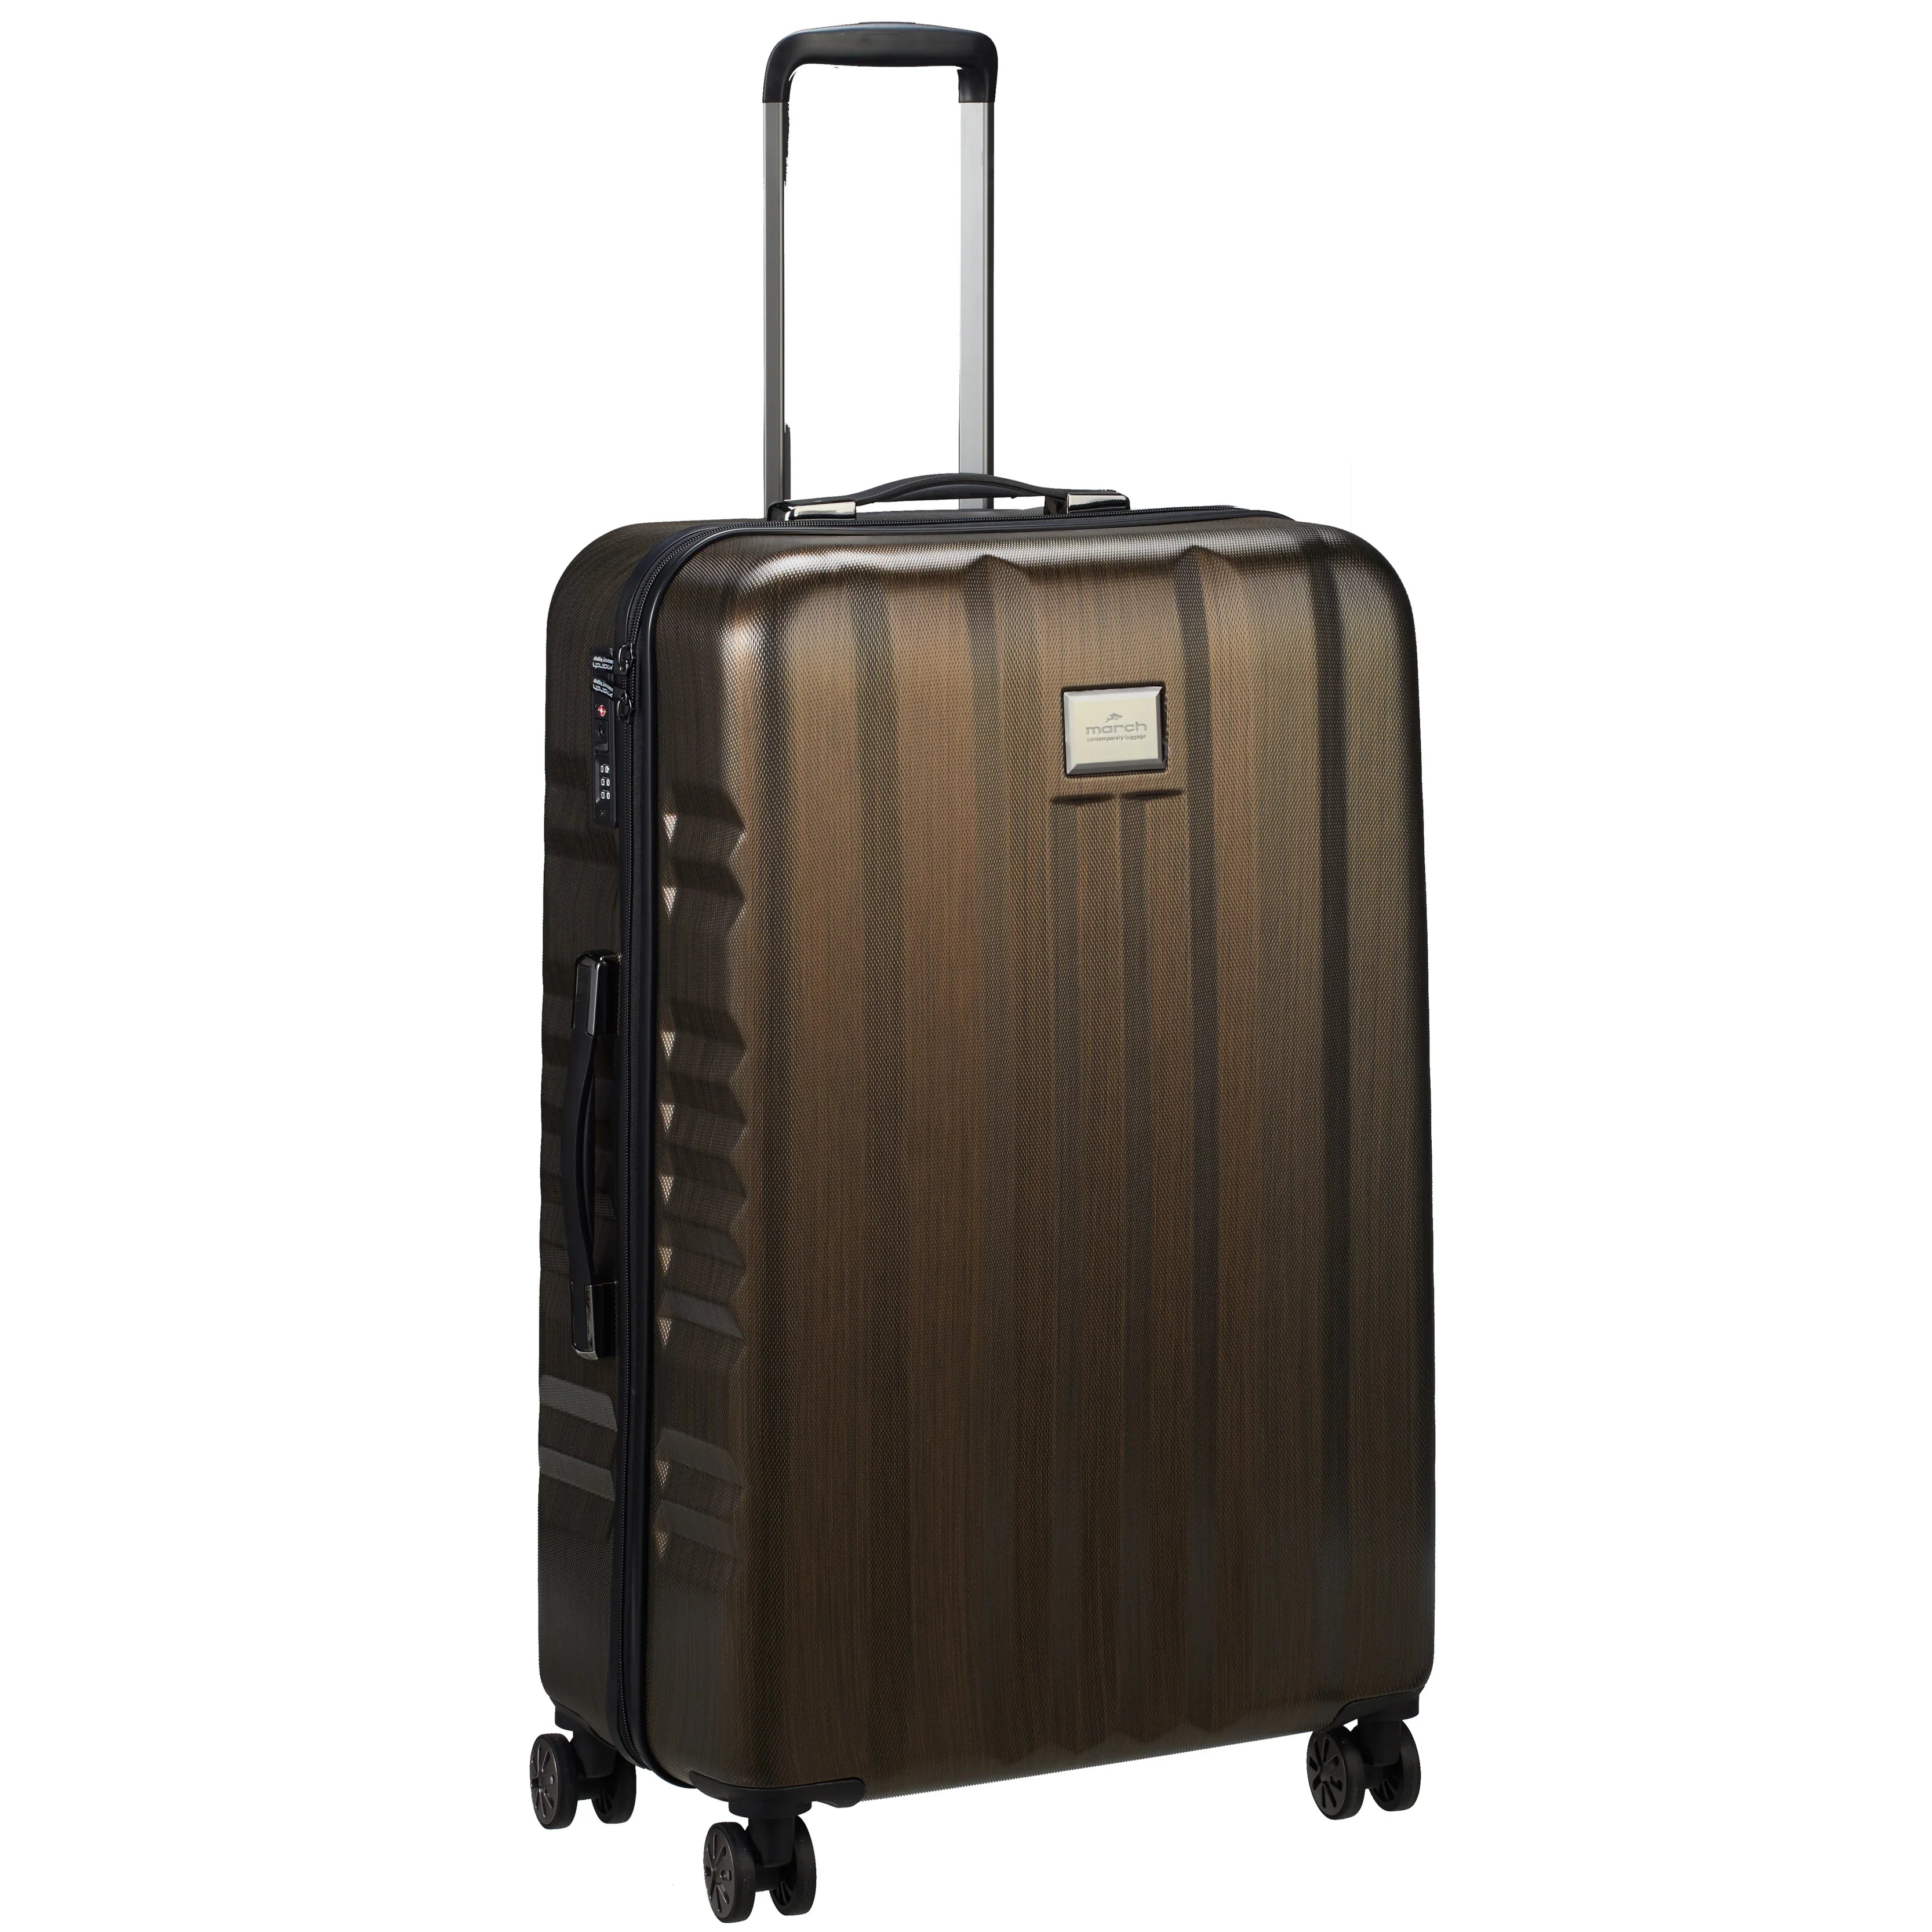 March 15 Trading Fly 4-wheel trolley 65 cm - bronze brushed